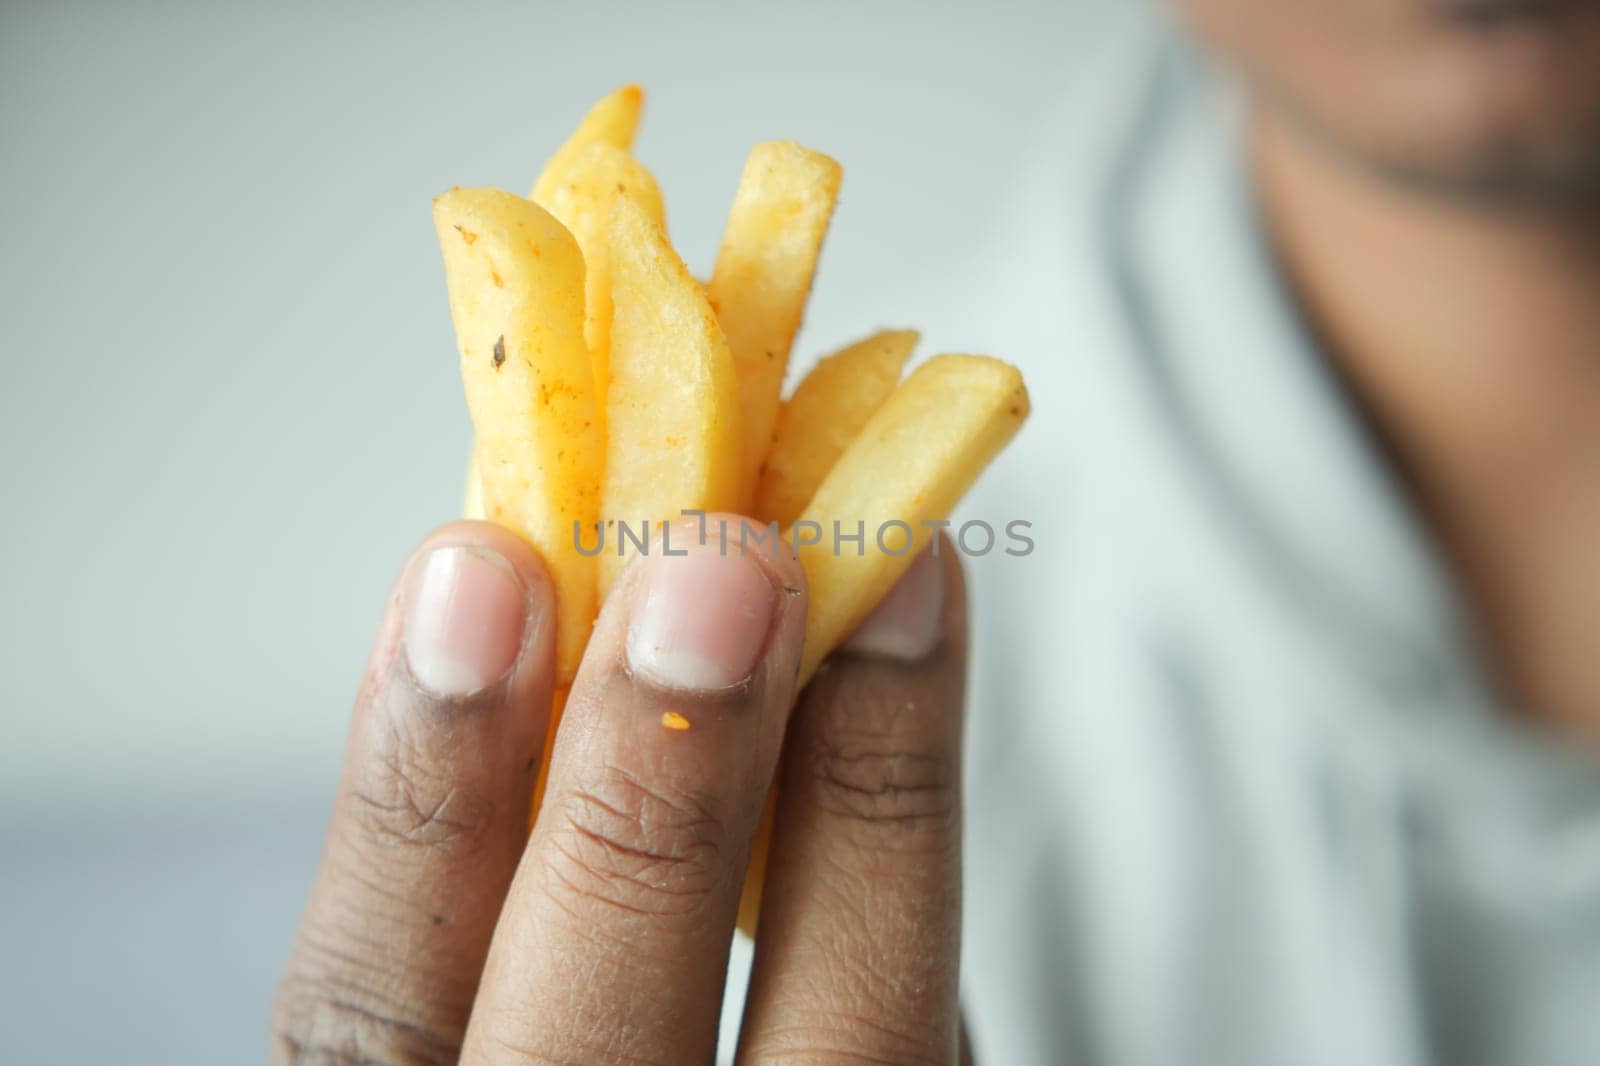 men eating french fries close up.